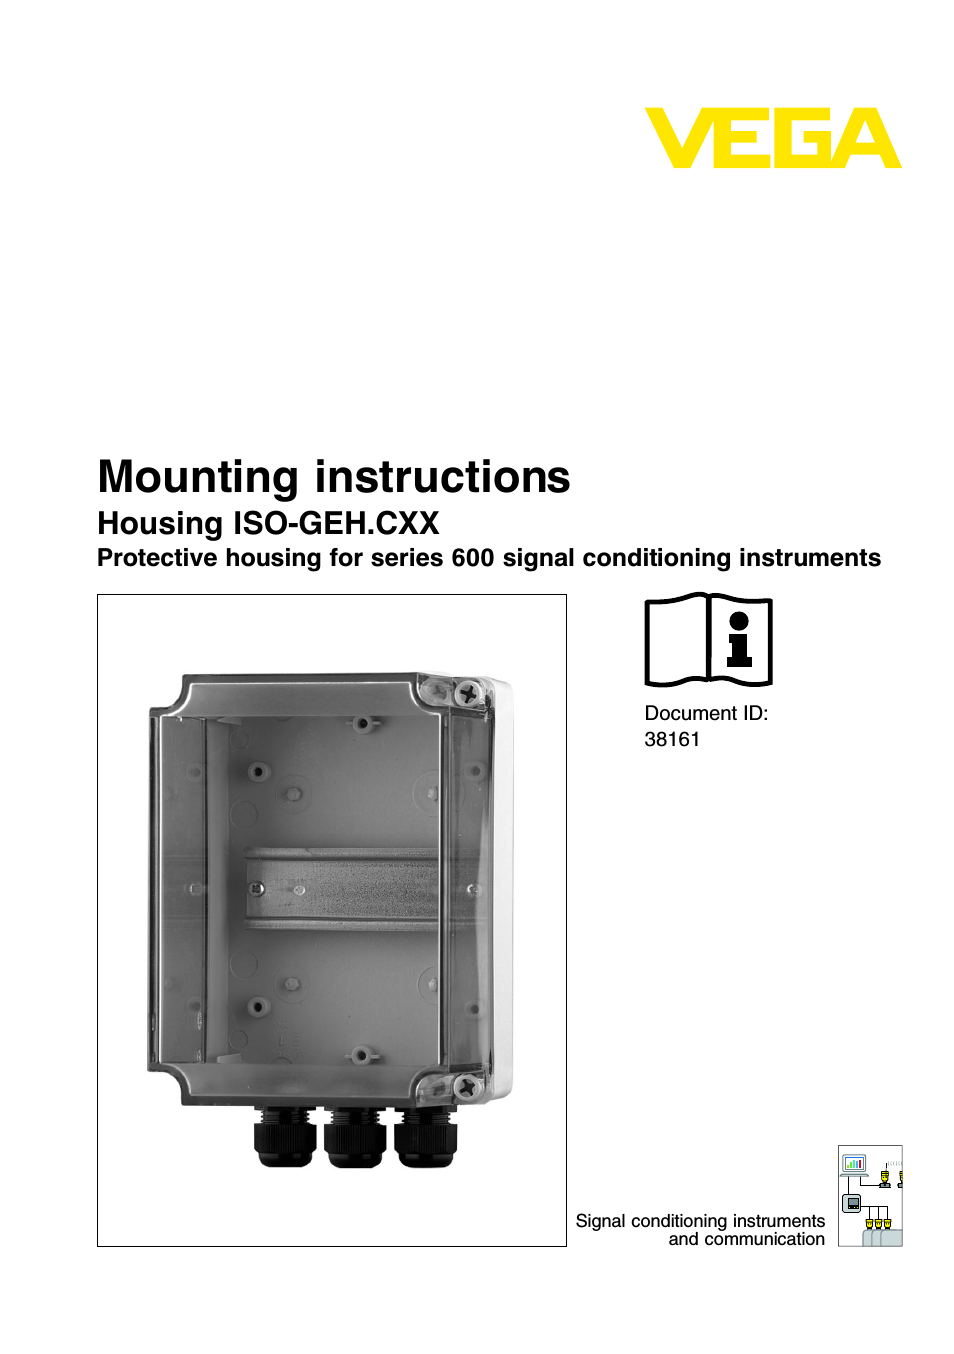 Housing ISO-GEH.CXX for series 600 signal conditioning instruments